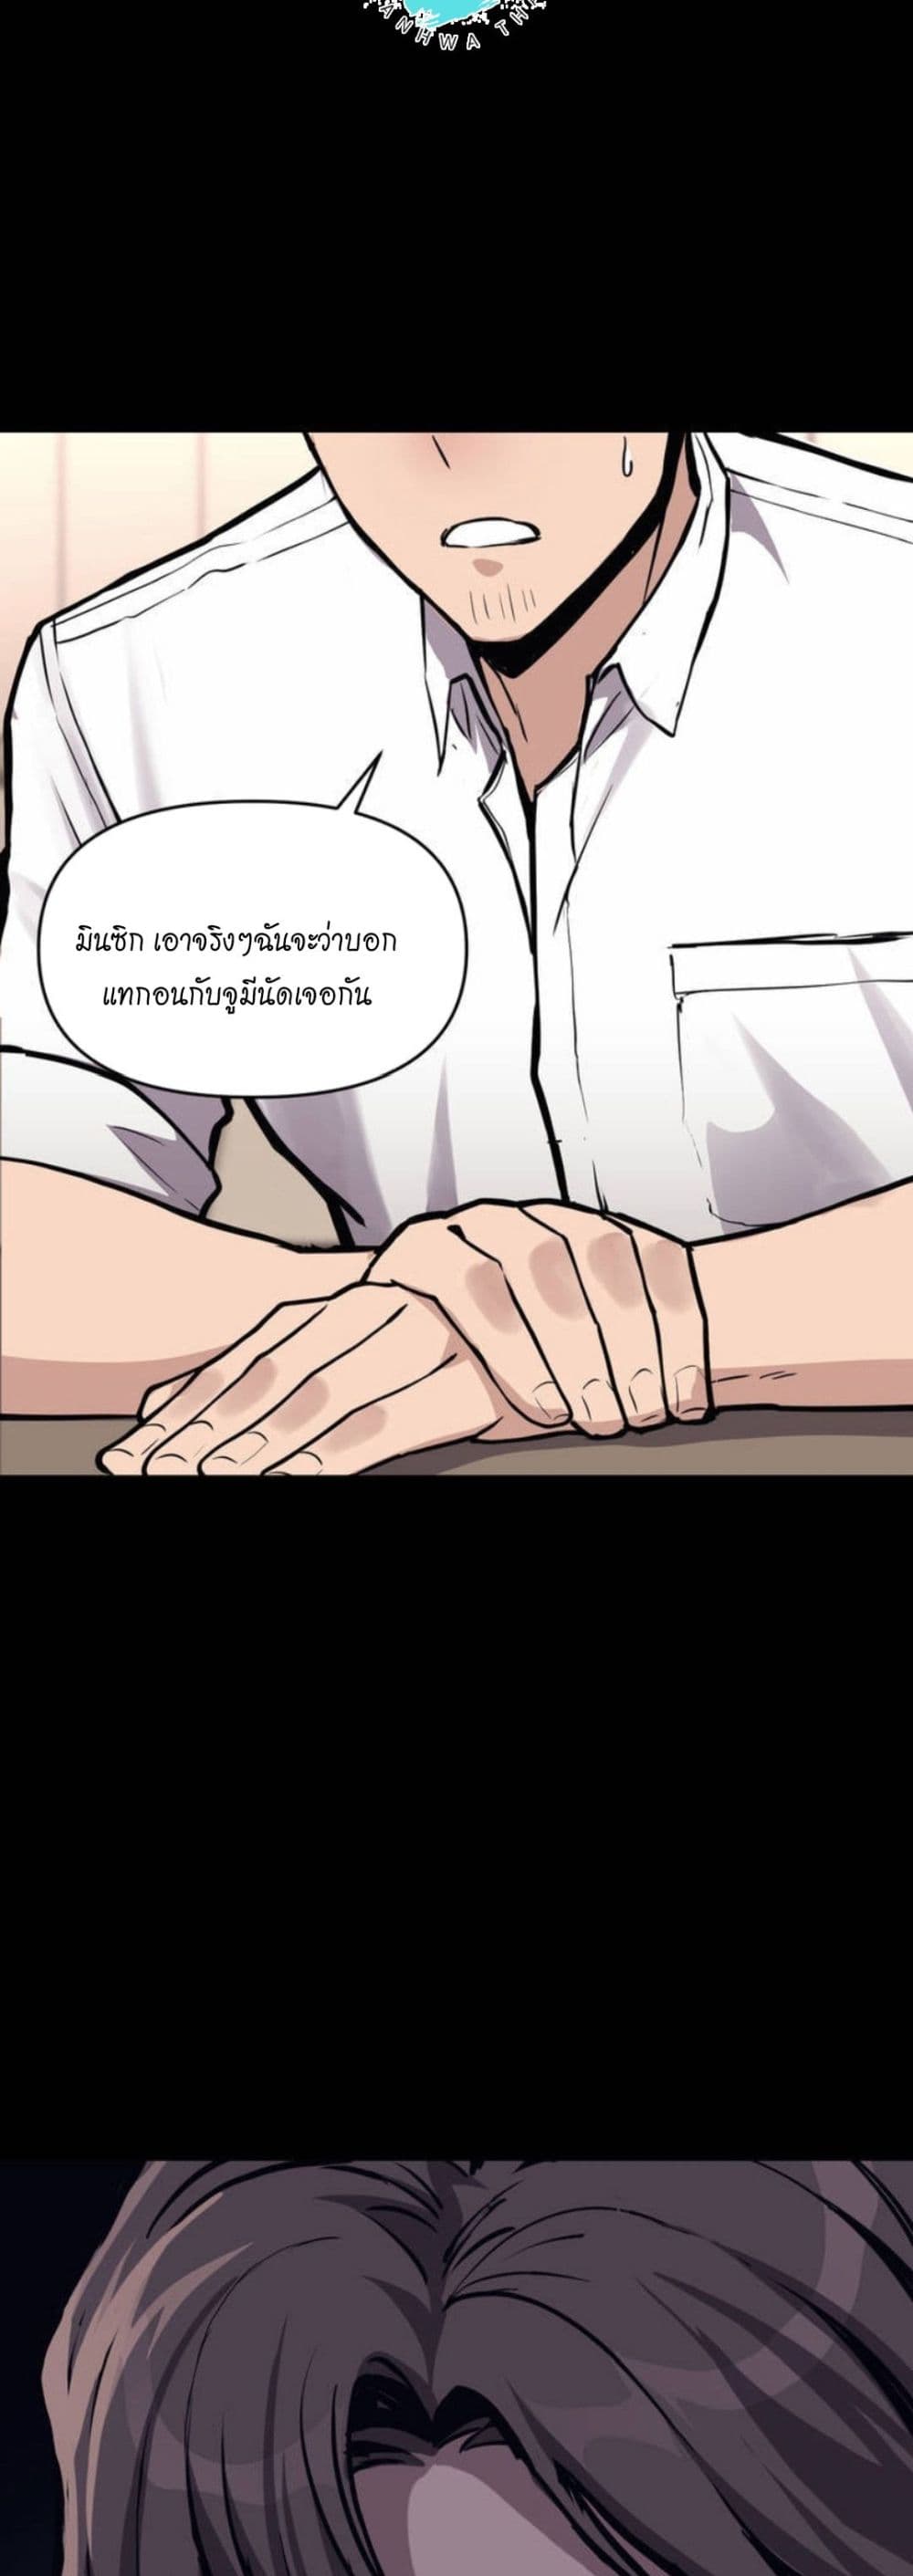 My Life is a Piece of Cake ตอนที่ 1 (12)